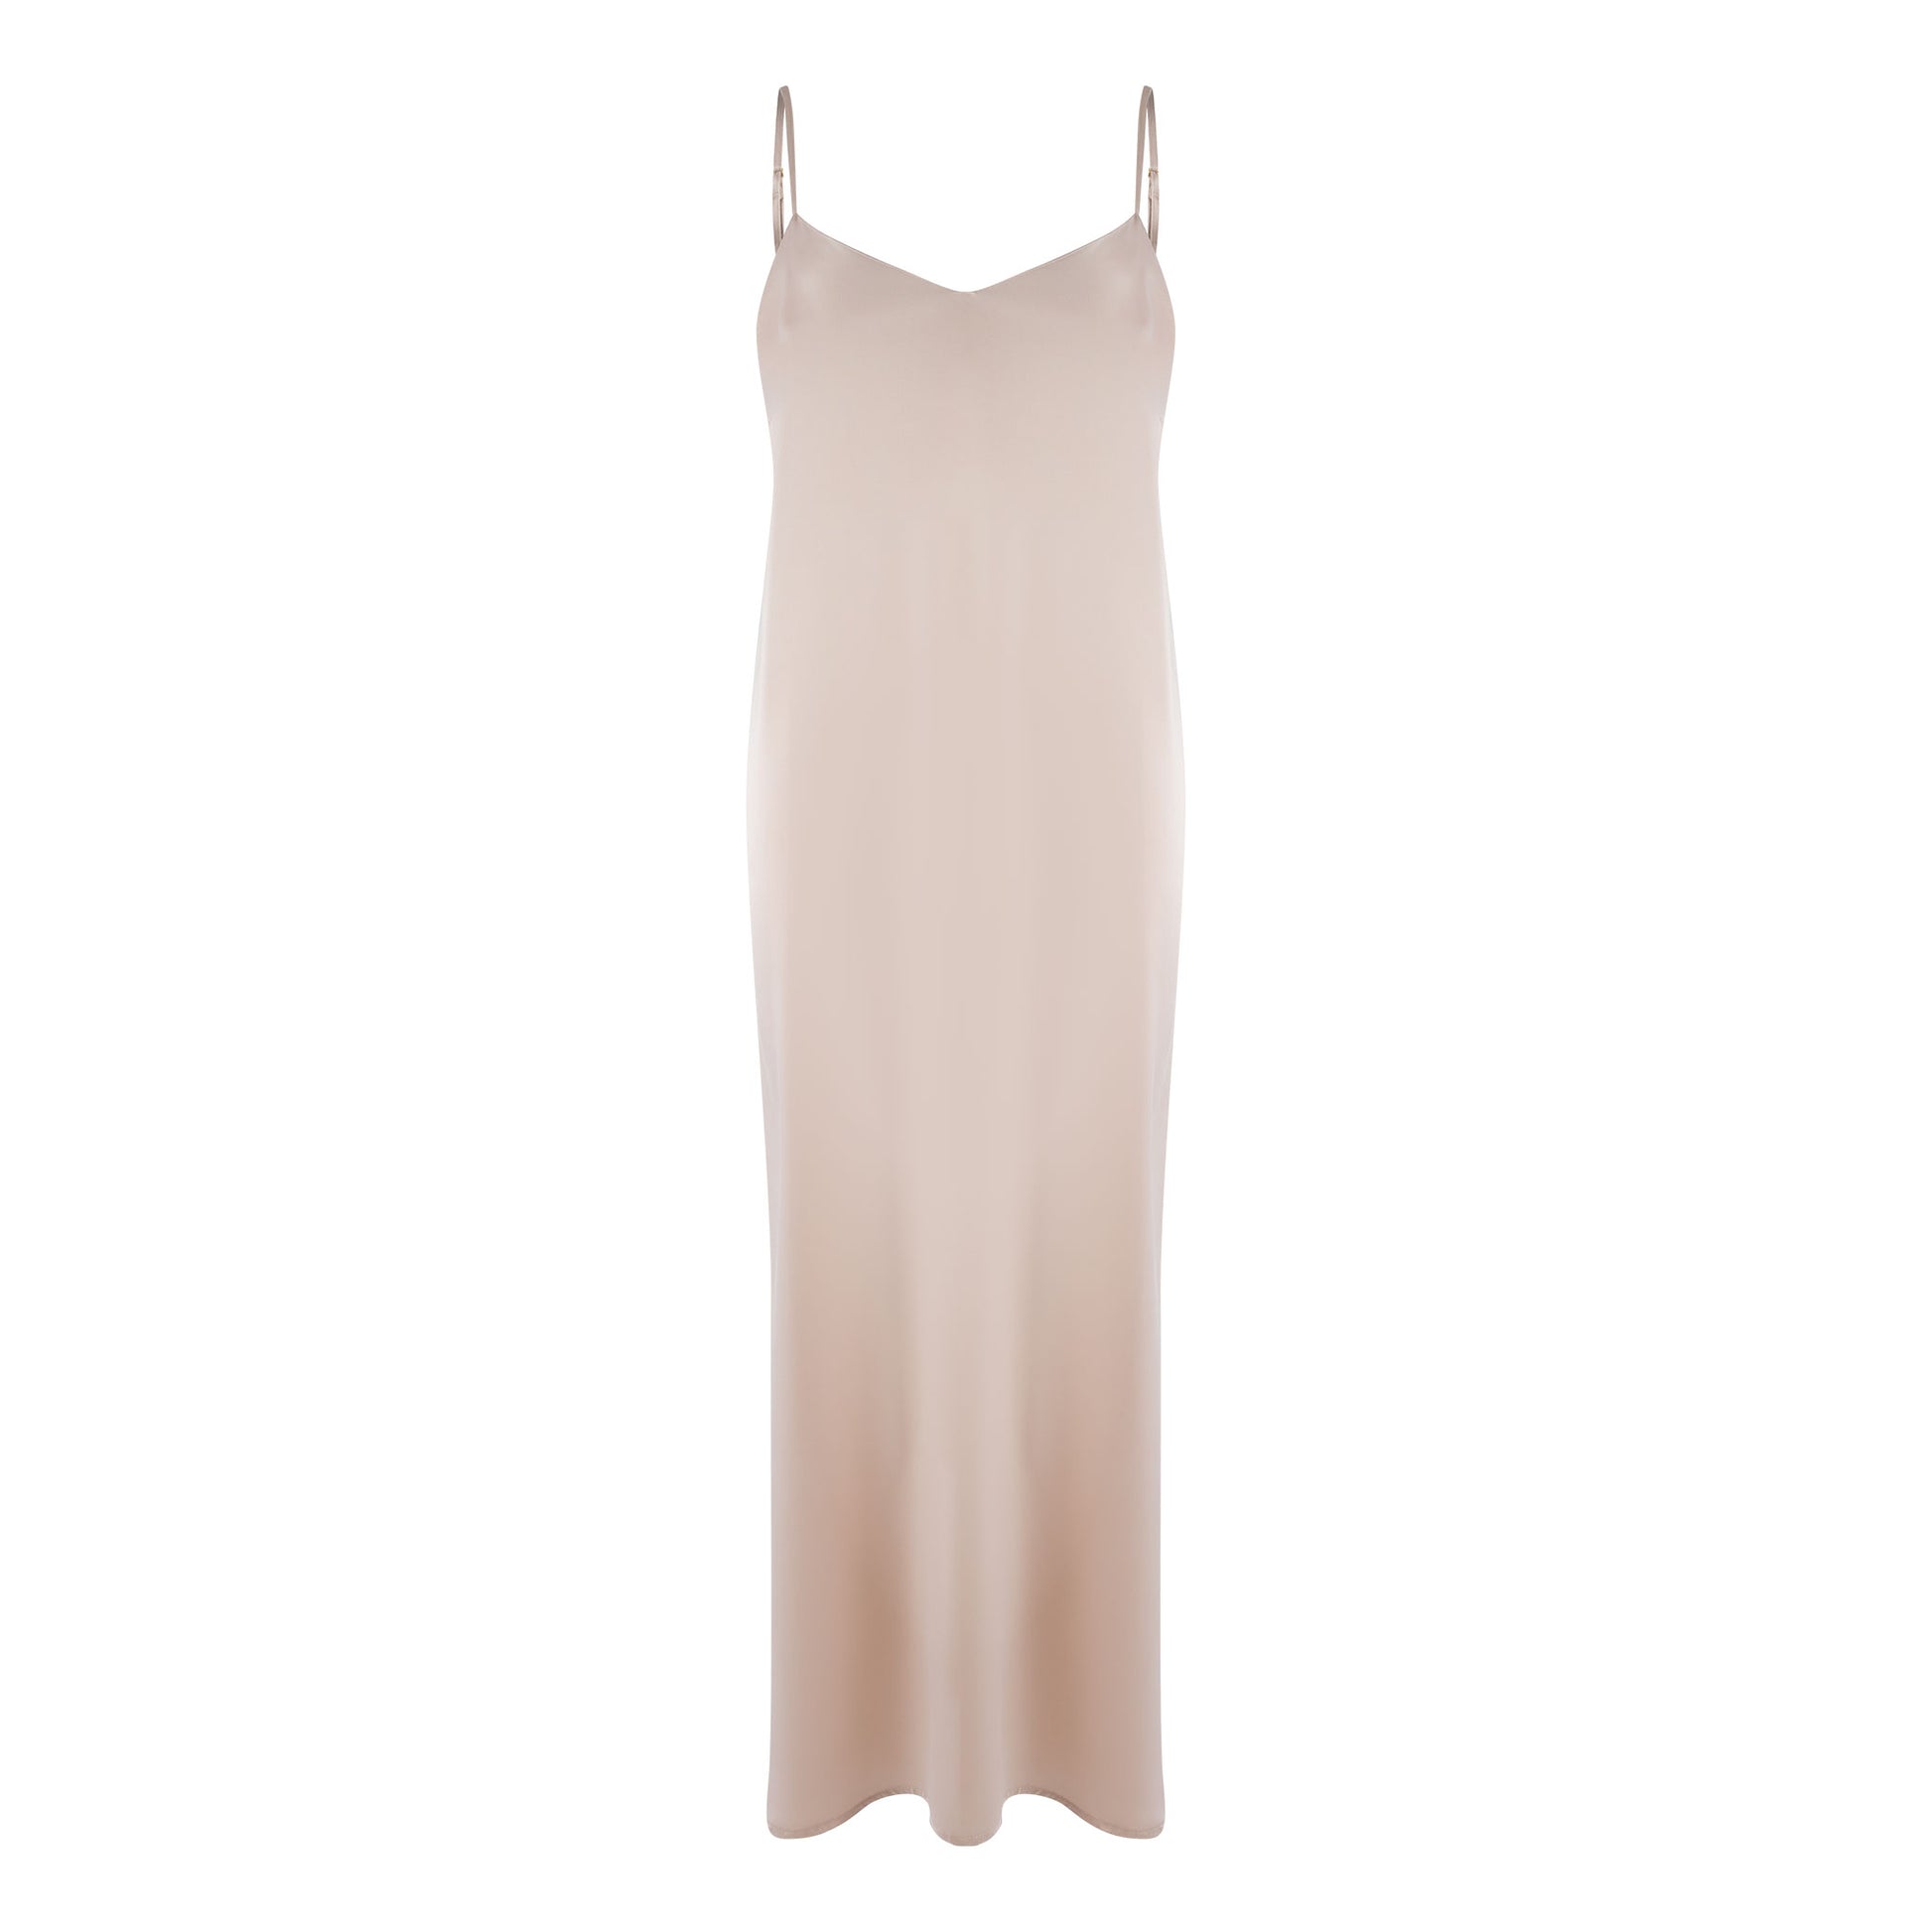 Enchanting Silk Slip Dress in Transcendent Pink. All garments are cold-washed. Machine-washing friendly.